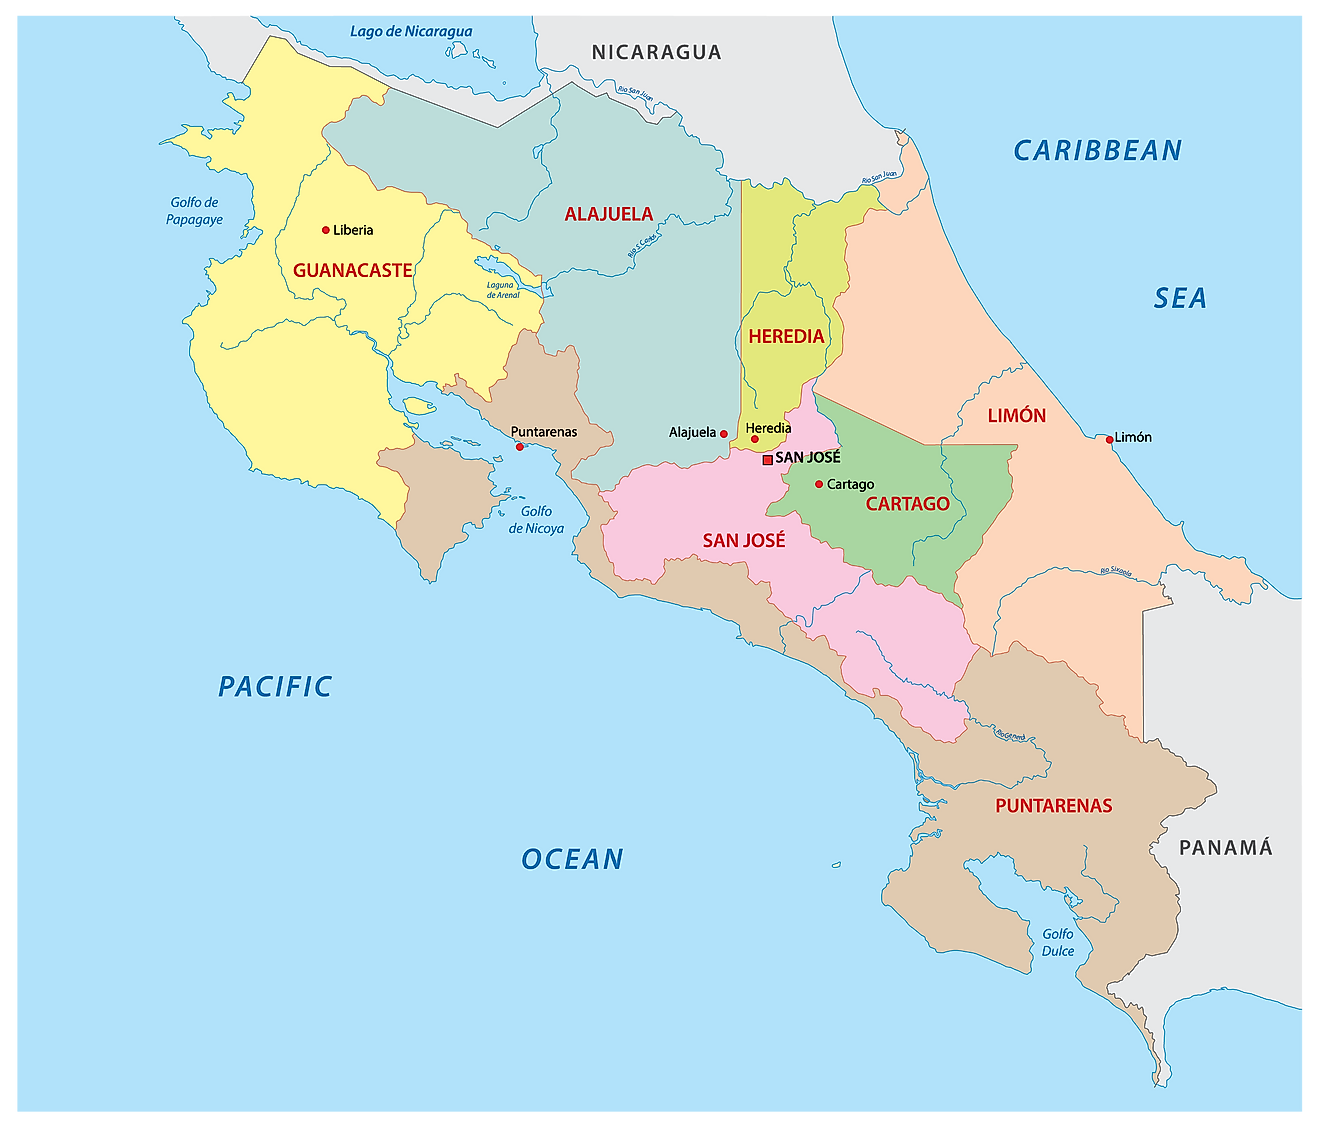 Political Map of Costa Rica showing its 7 provinces and the capital city of San Jose